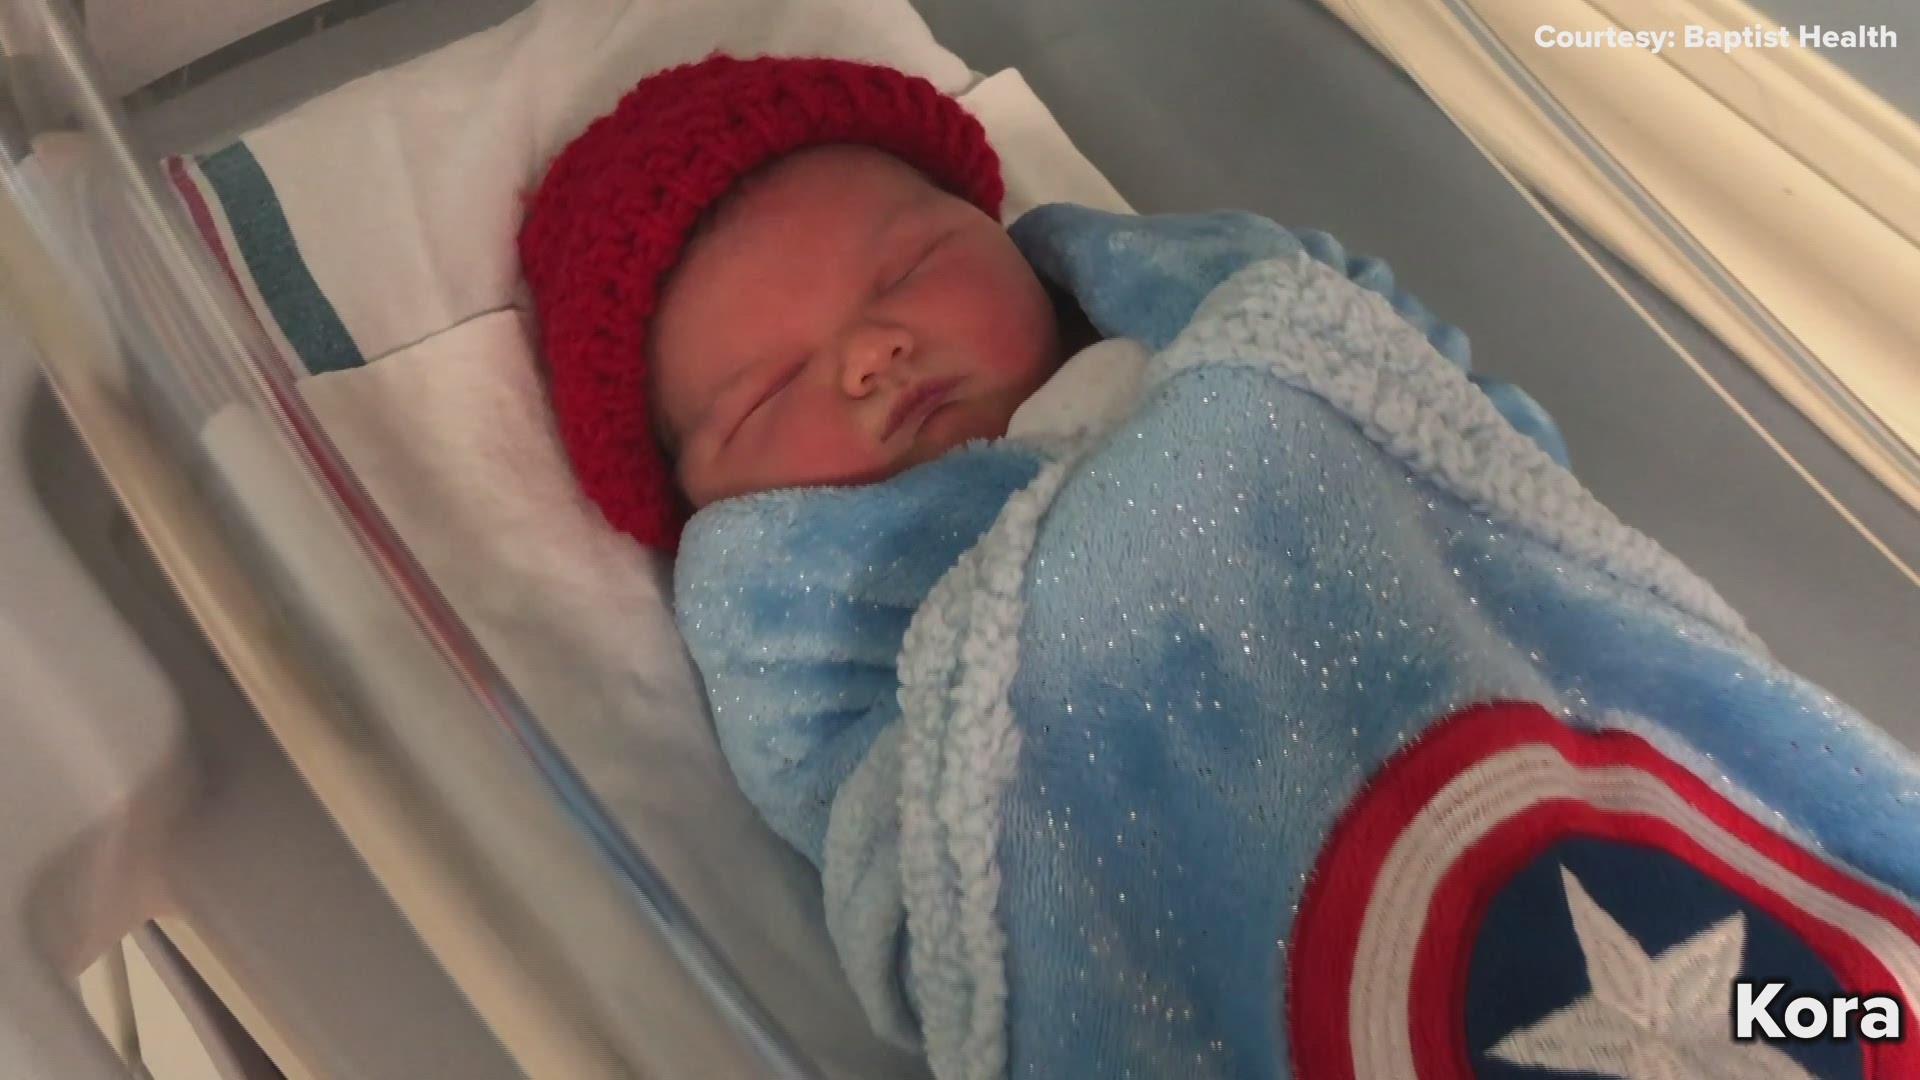 The precious newborns were given the crocheted red hats to bring awareness to the number one killer of Americans -- heart disease.